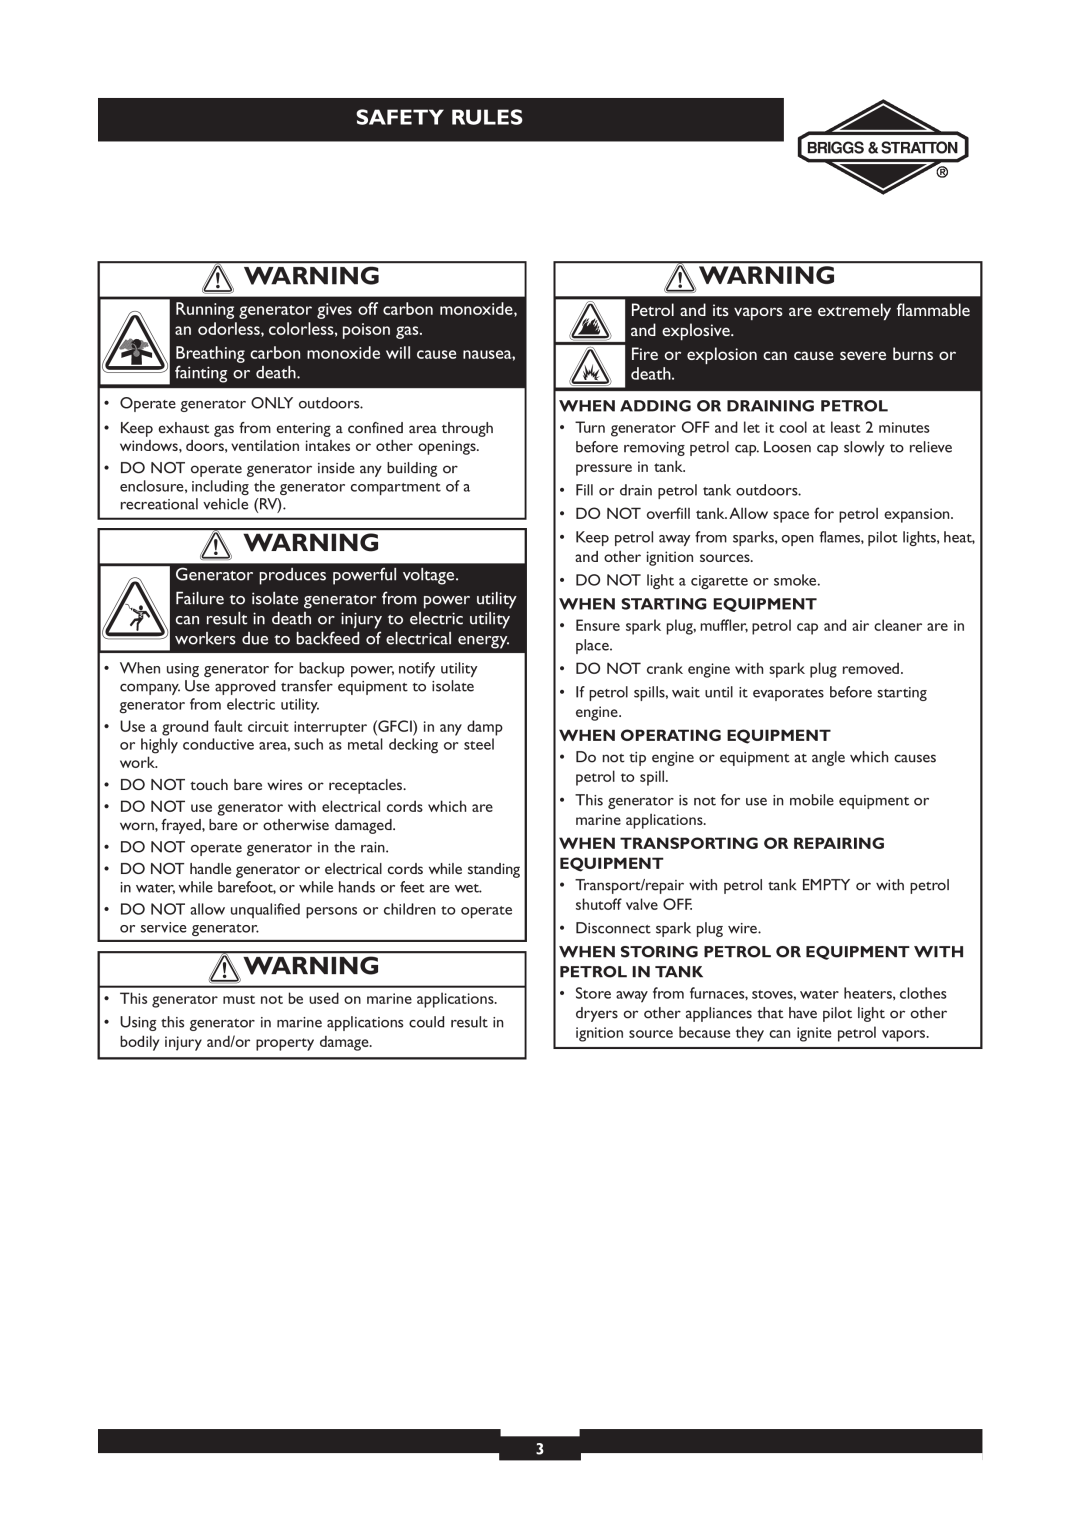 Briggs & Stratton 030212, 030213 owner manual Breathing carbon monoxide will cause nausea, fainting or death, Safety Rules 